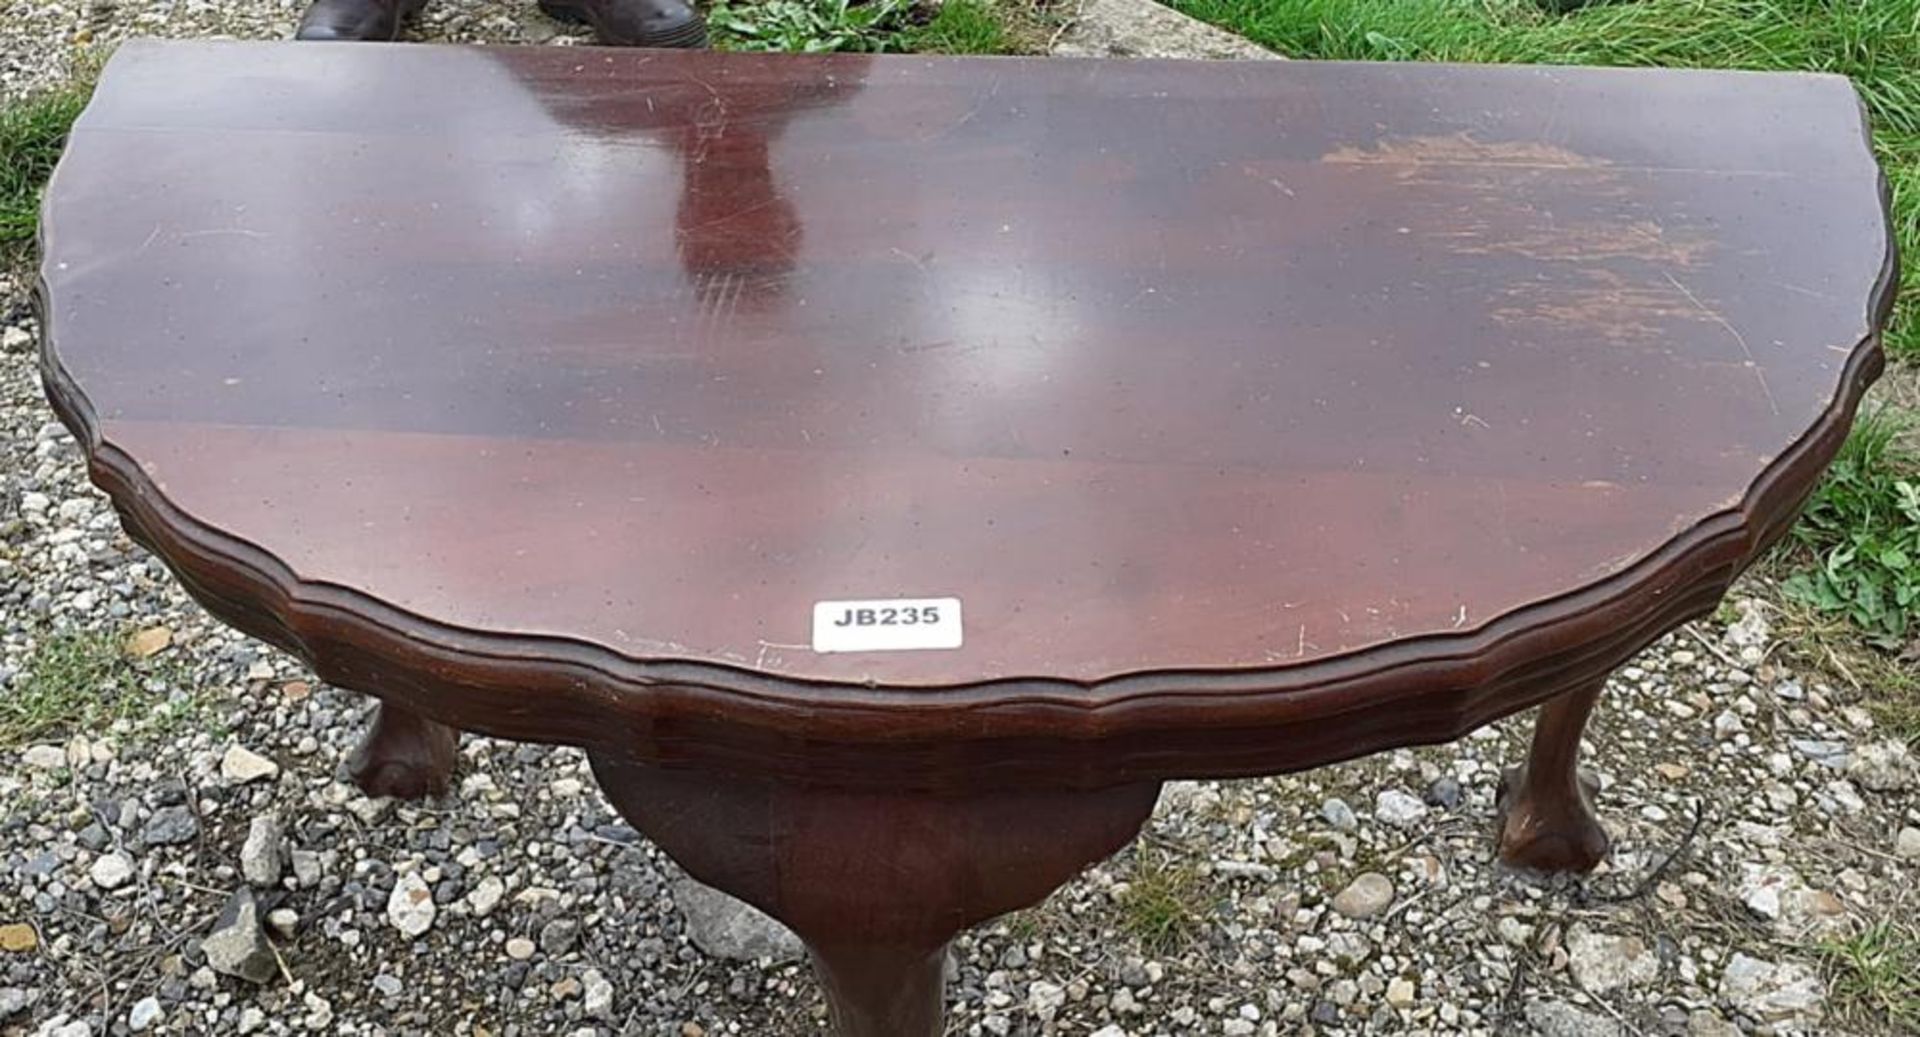 1 x Antique Mahogany Half Moon Hall Table With Ball And Claw Feet - Ref: JB235 - Pre-Owned - NO - Image 2 of 5